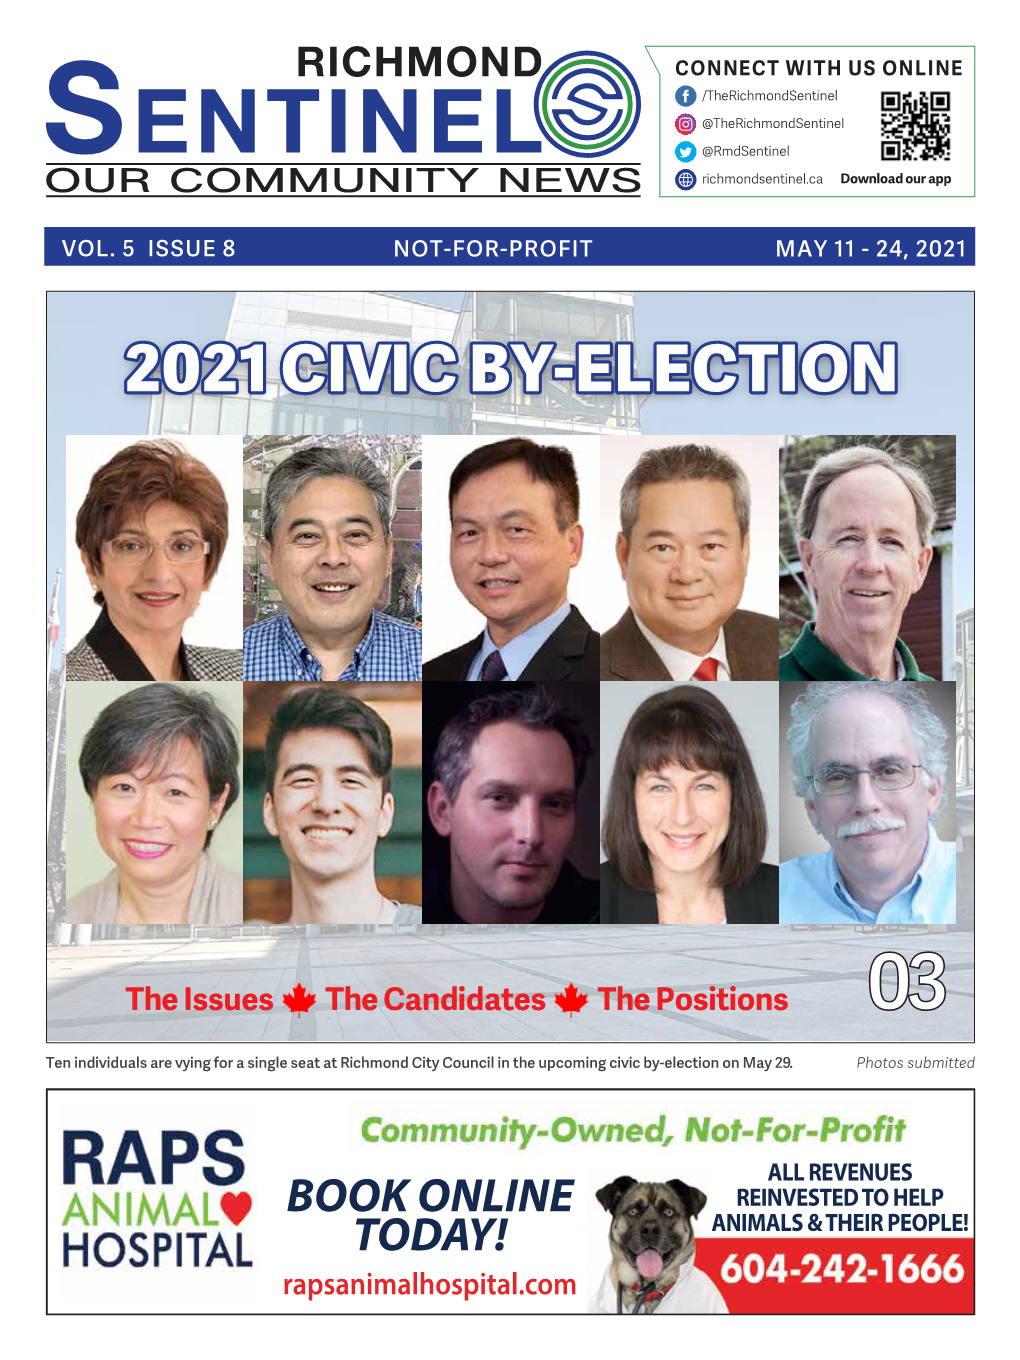 2021 Civic By-Election